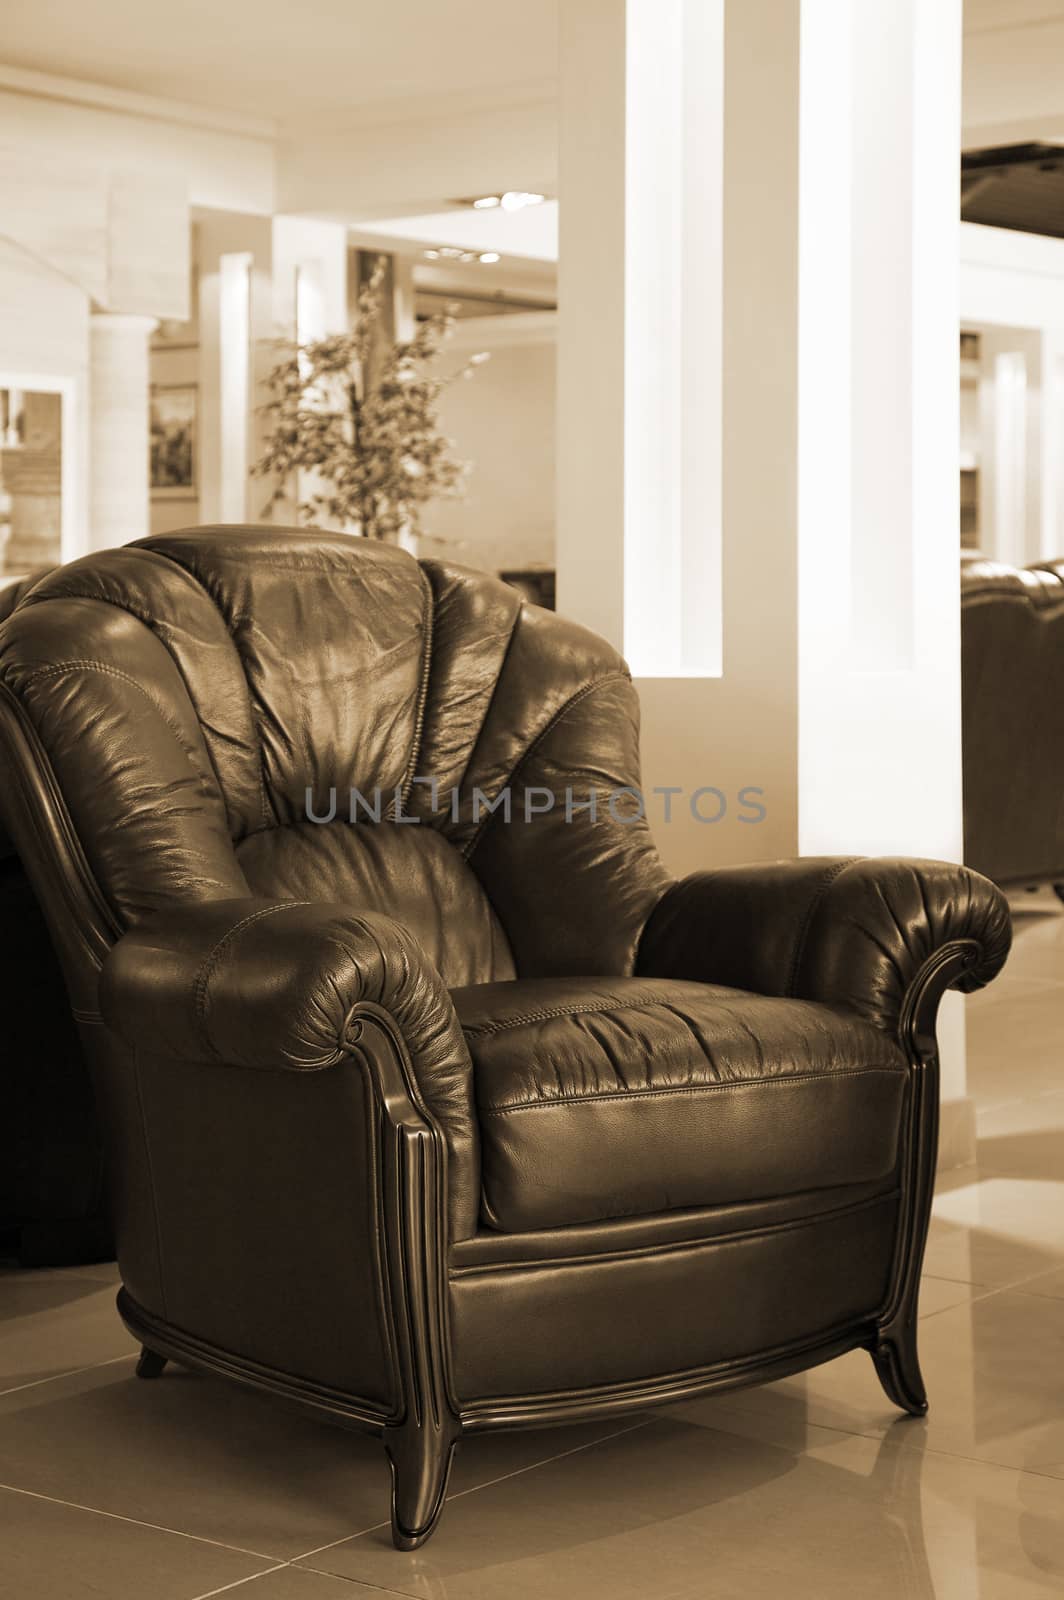 Beautiful leather armchair in a modern apartment